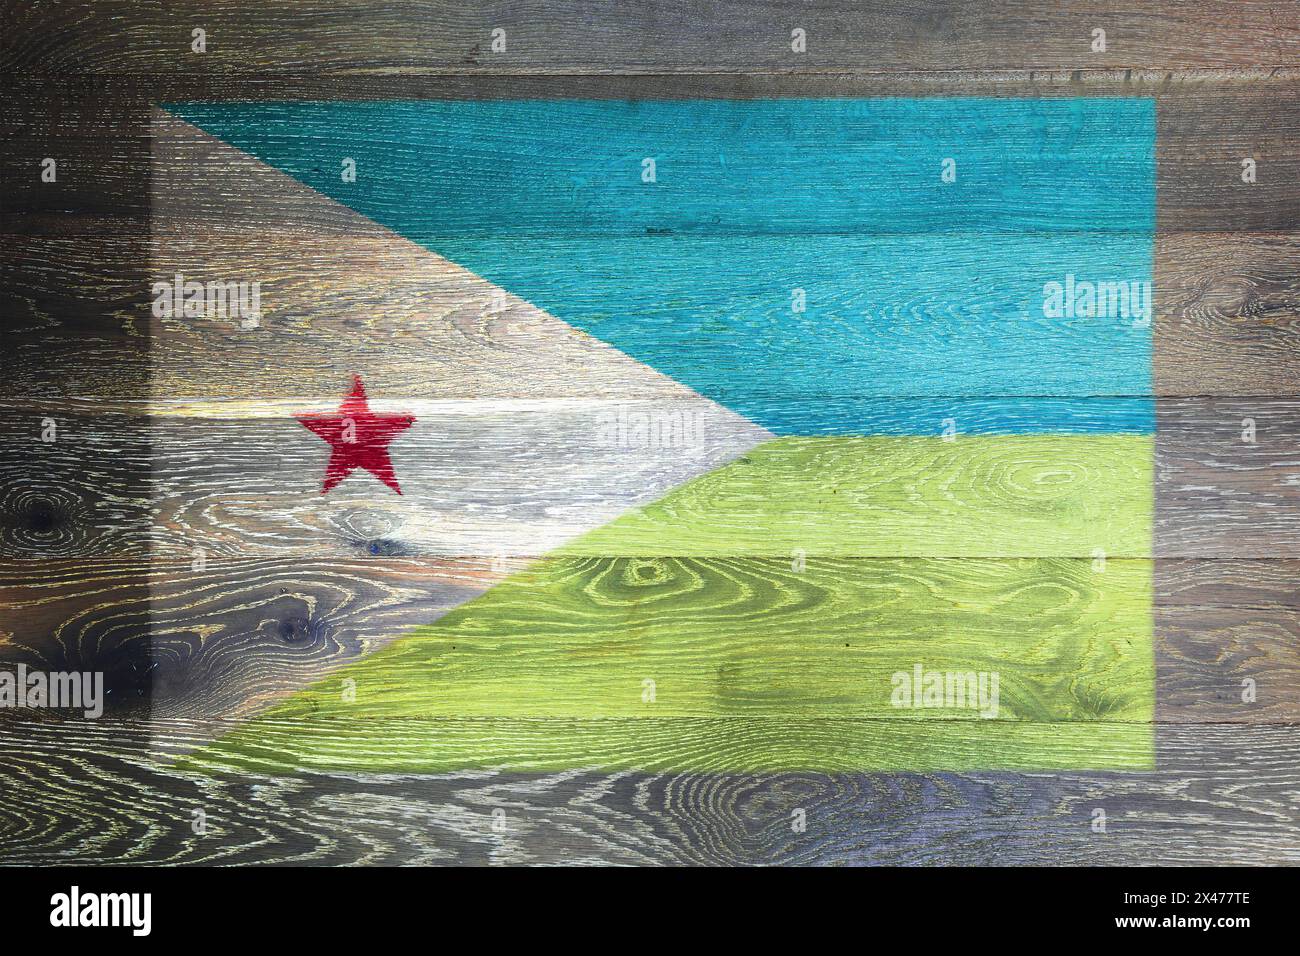 Djibouti flag on rustic old wood surface background Stock Photo